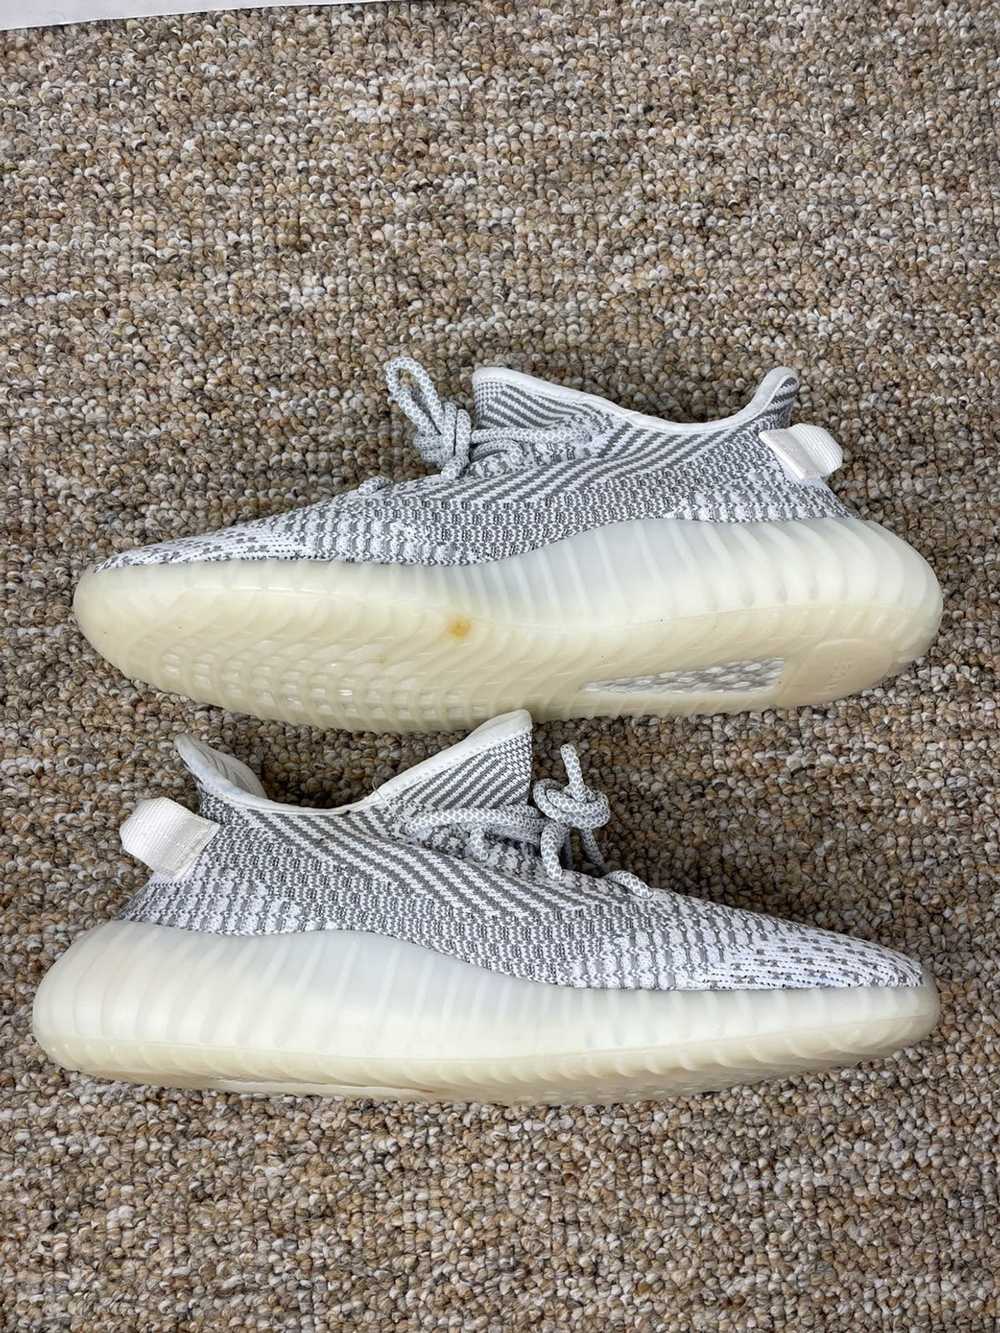 Adidas Yeezy Boost 350 V2 Static Non Reflective - image 3